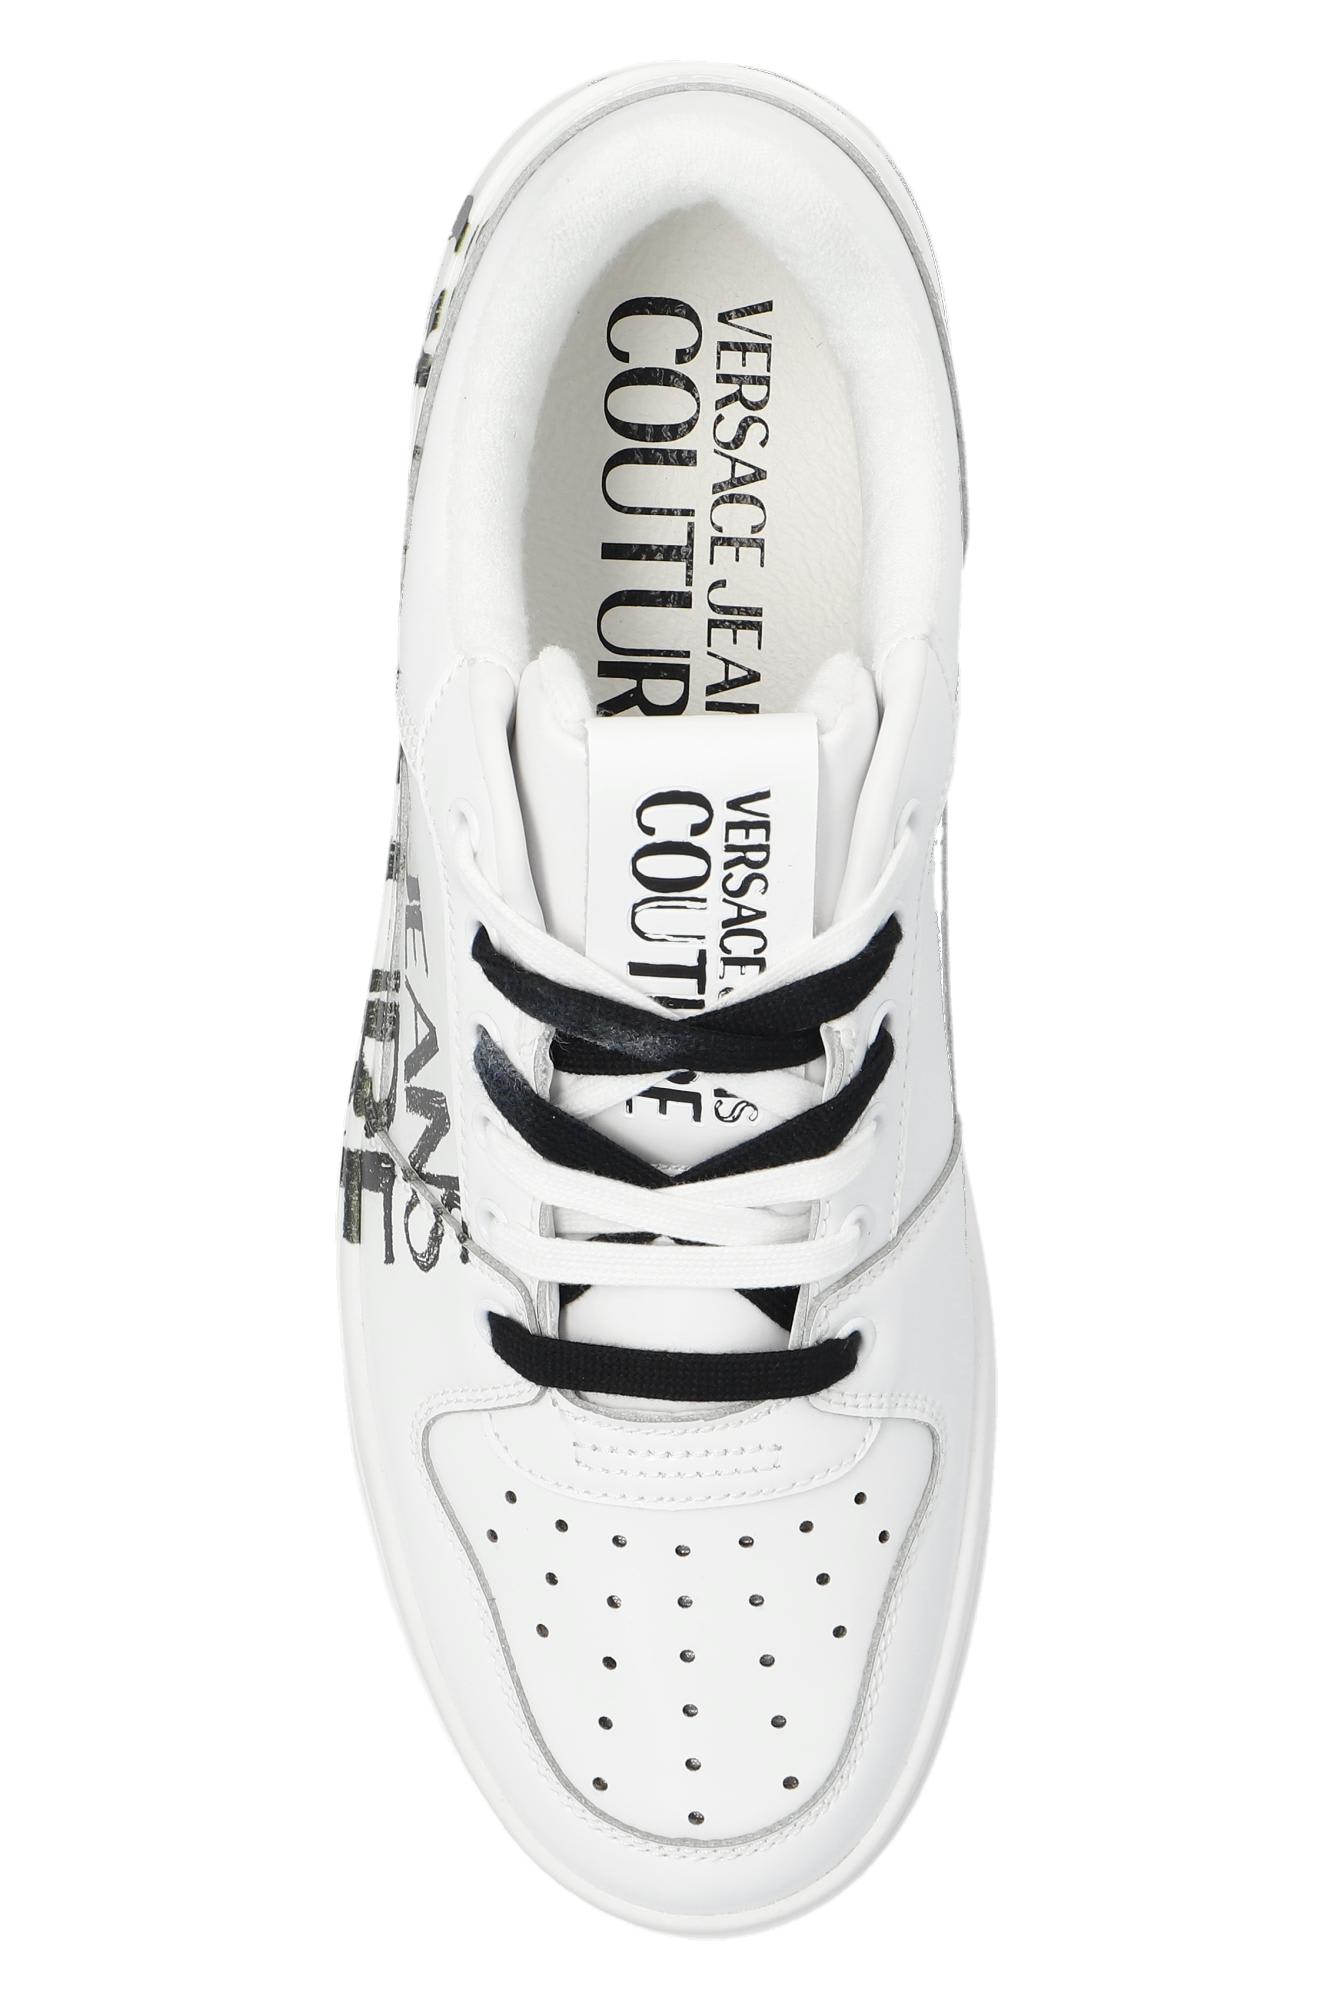 Shop Versace Jeans Couture Sneakers With Logo In White